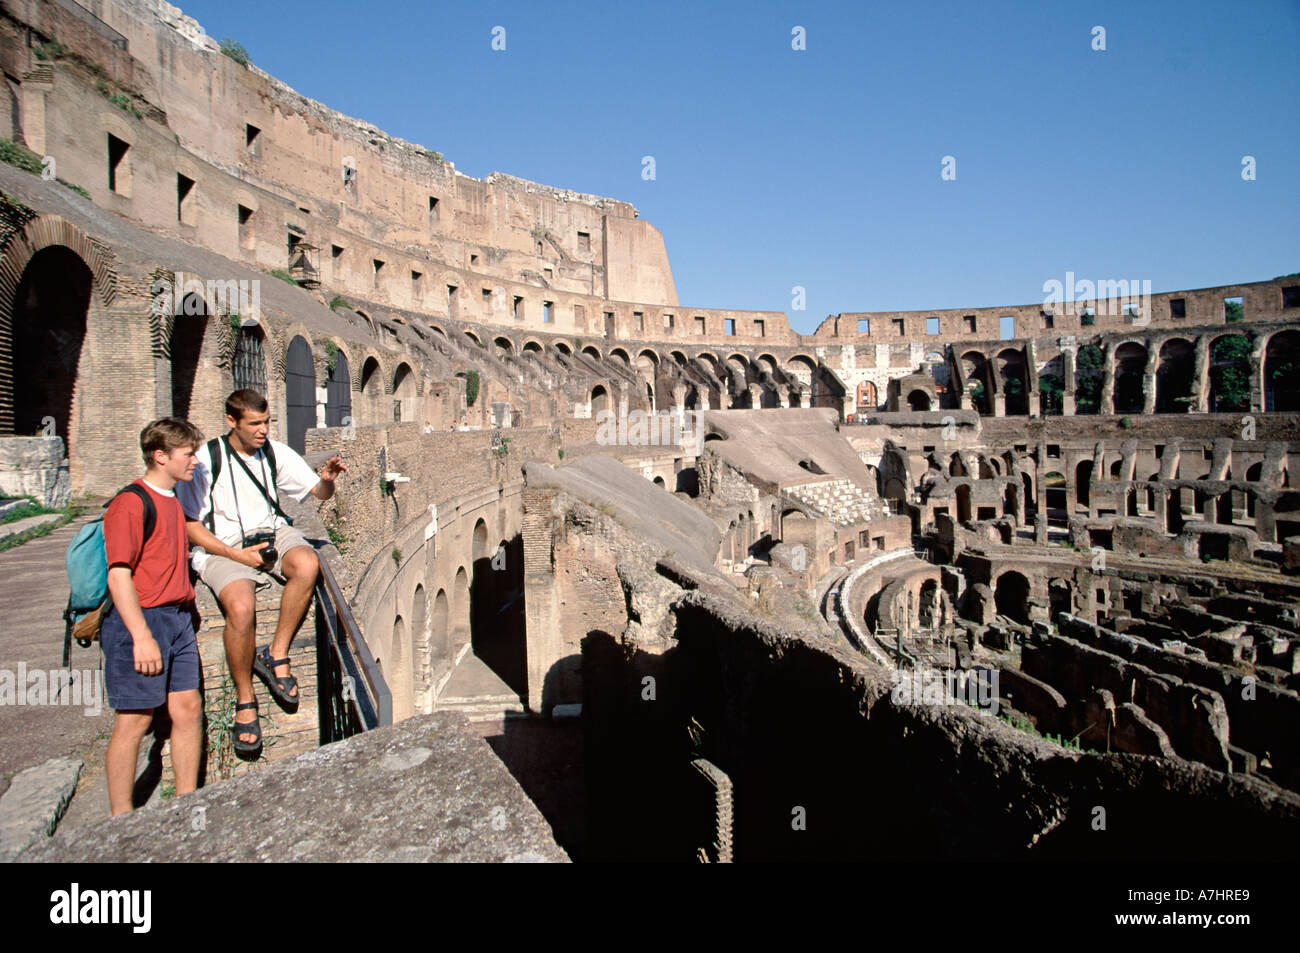 Two Male Students inside Coliseum in Rome ancient history Caucasian portrait landmark day outdoors casual clothes Stock Photo